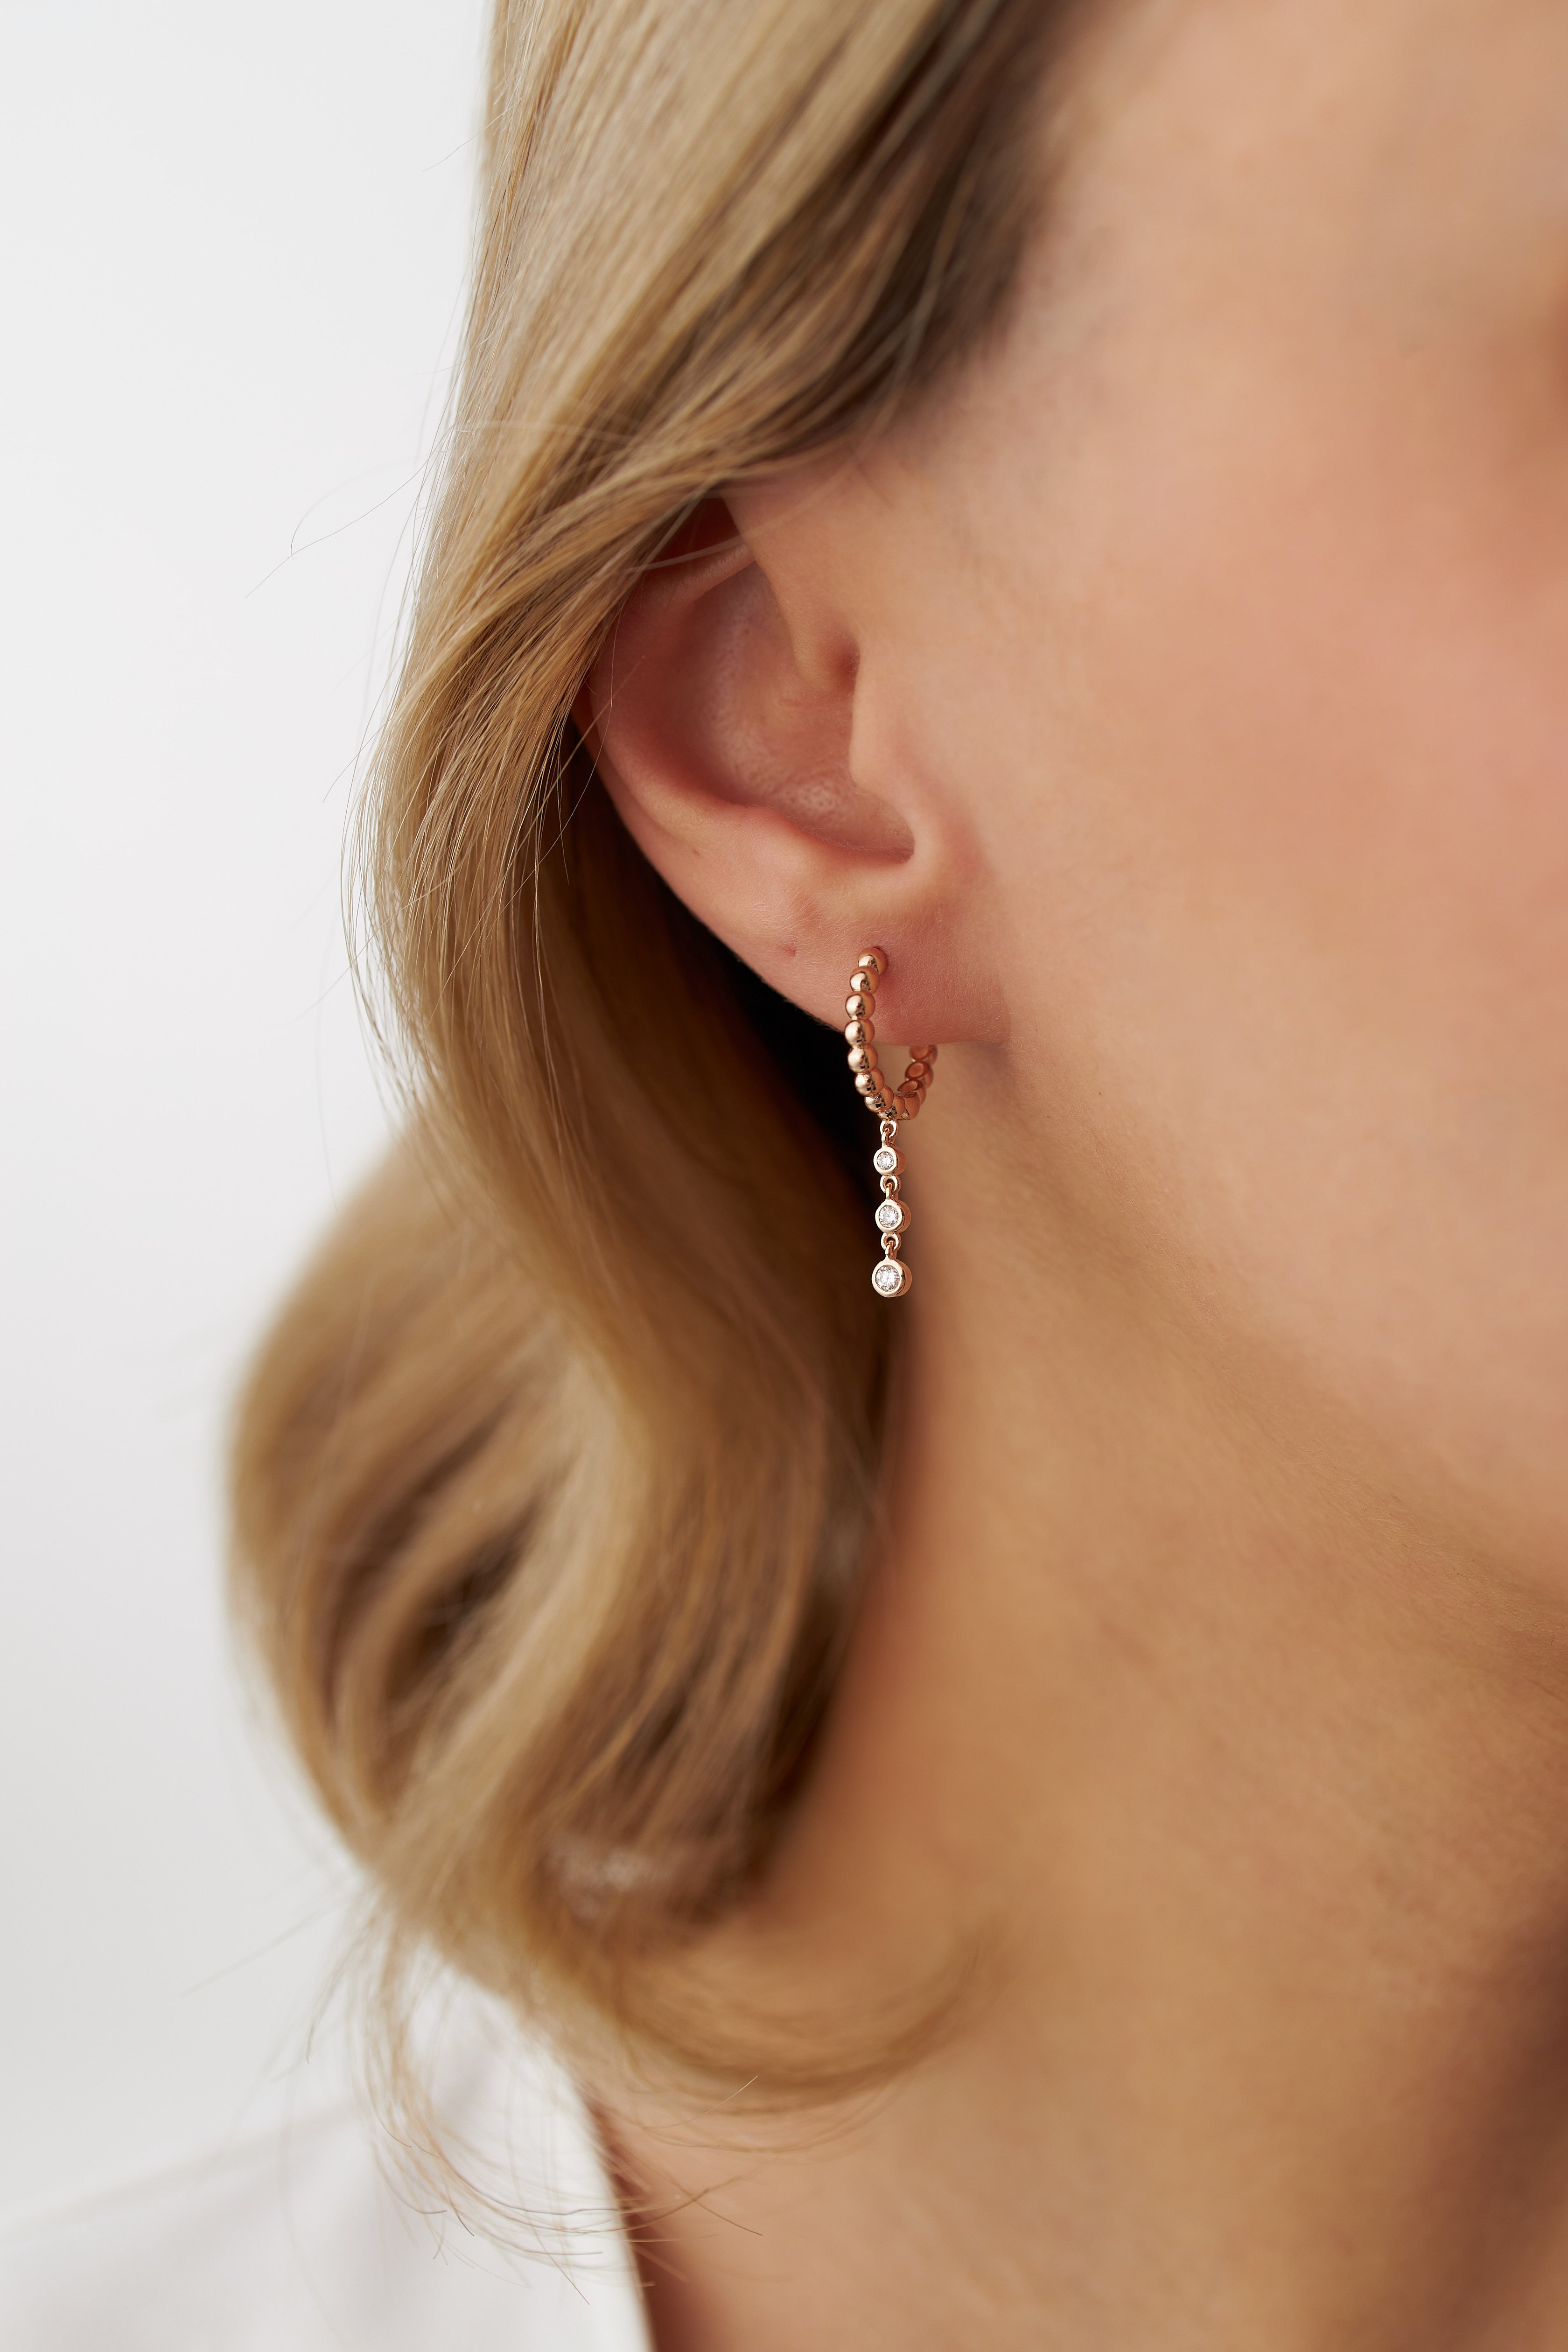 Beaded Diamond Drop Earrings Available in 14K and 18K Gold